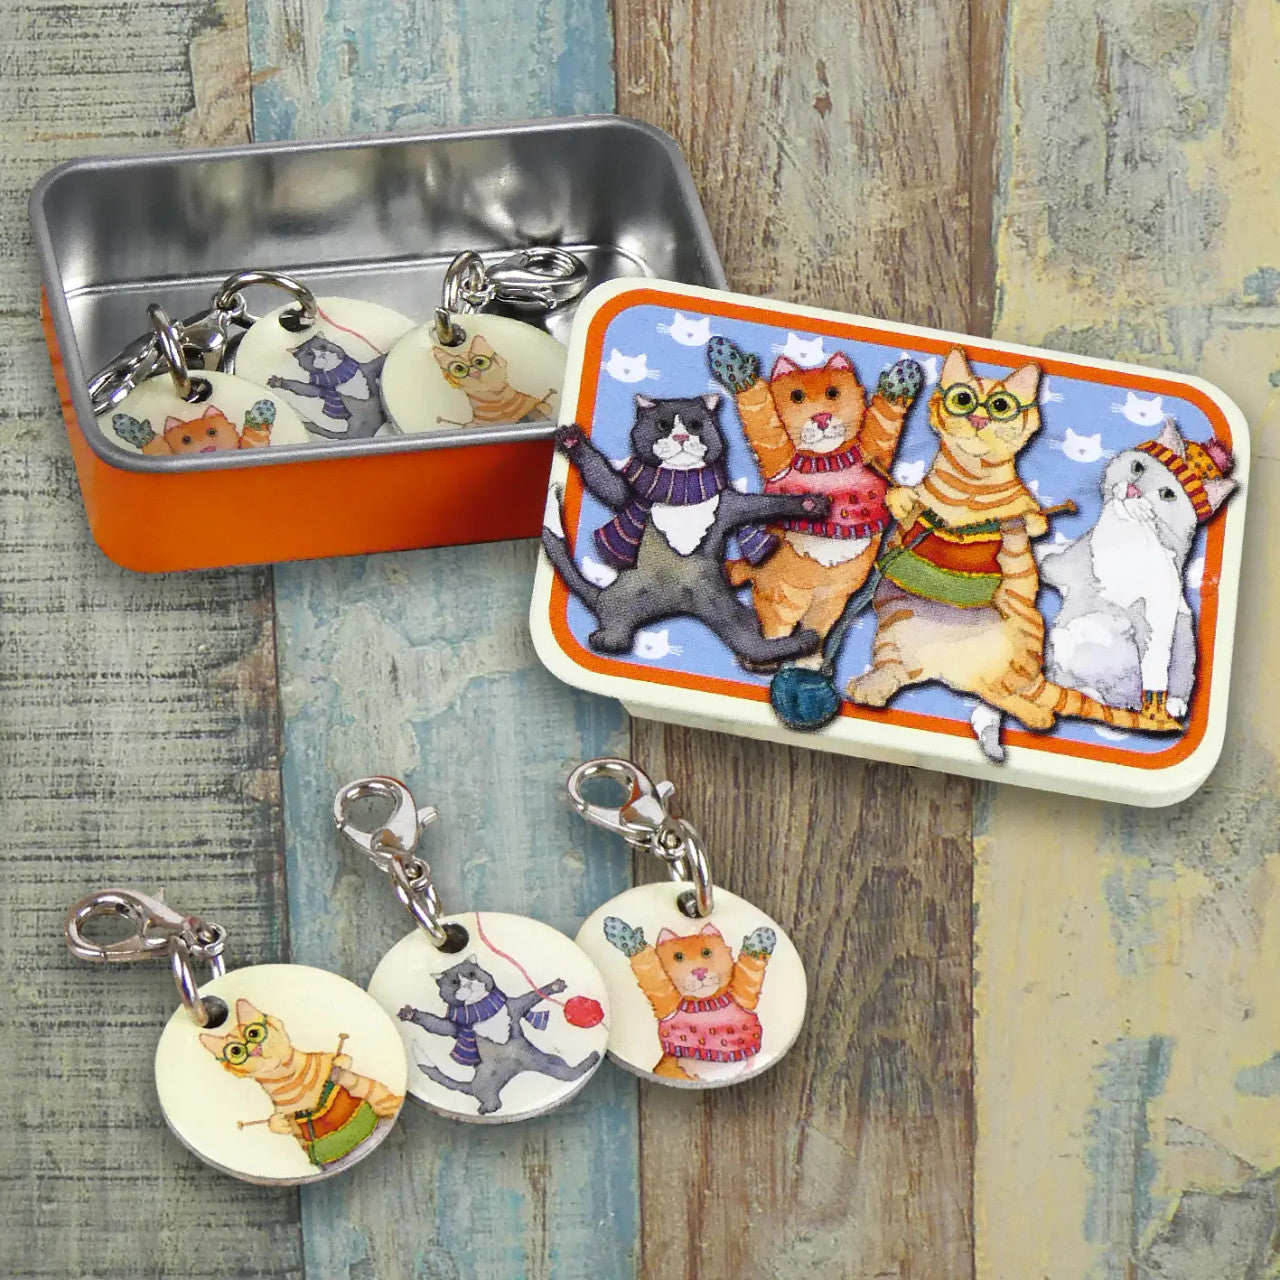 Kittens Set of 6 Stitch Crochet Markers in a Pocket Tin from Emma Ball.